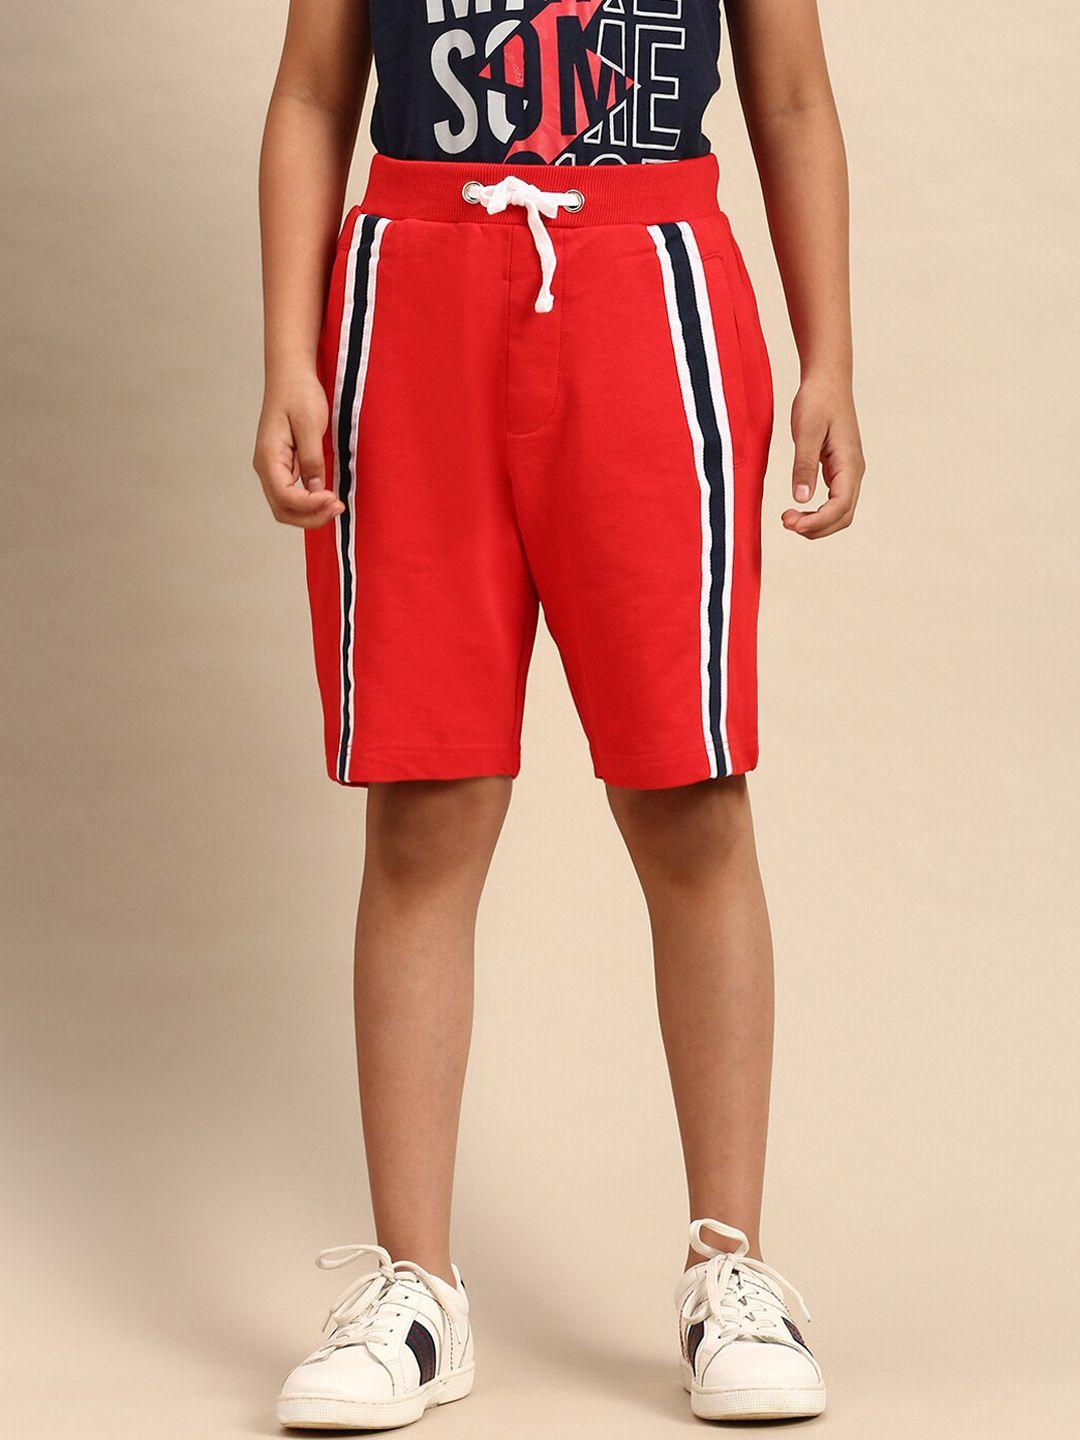 pipin-boys-red-striped-shorts